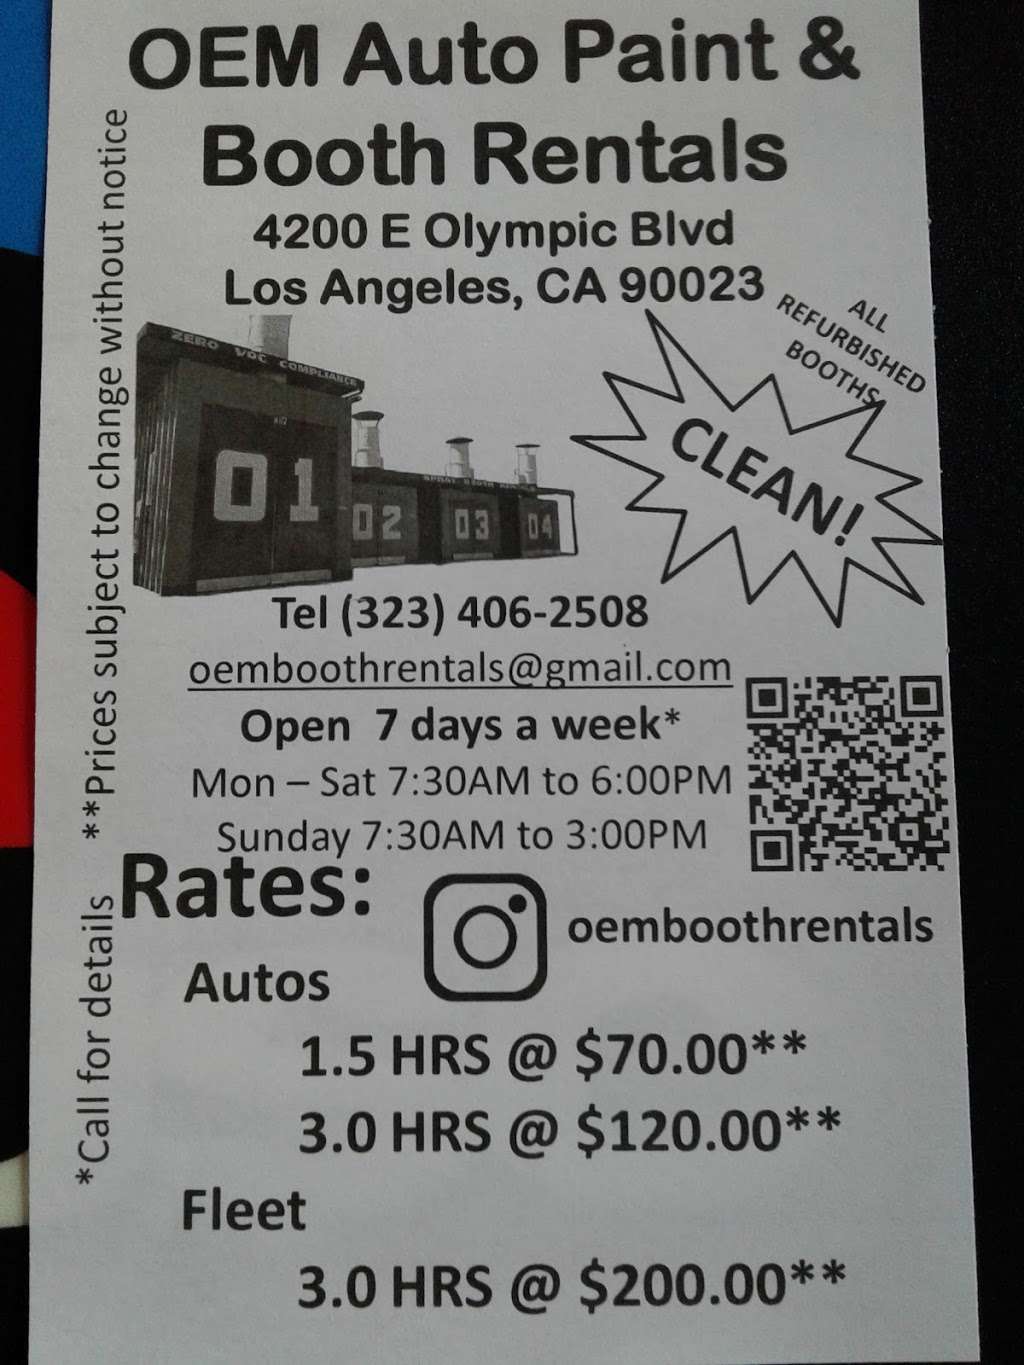 OEM Auto Paint & Spray Booth Rentals | 4200 E Olympic Blvd, Los Angeles, CA 90023 | Phone: (323) 406-2508